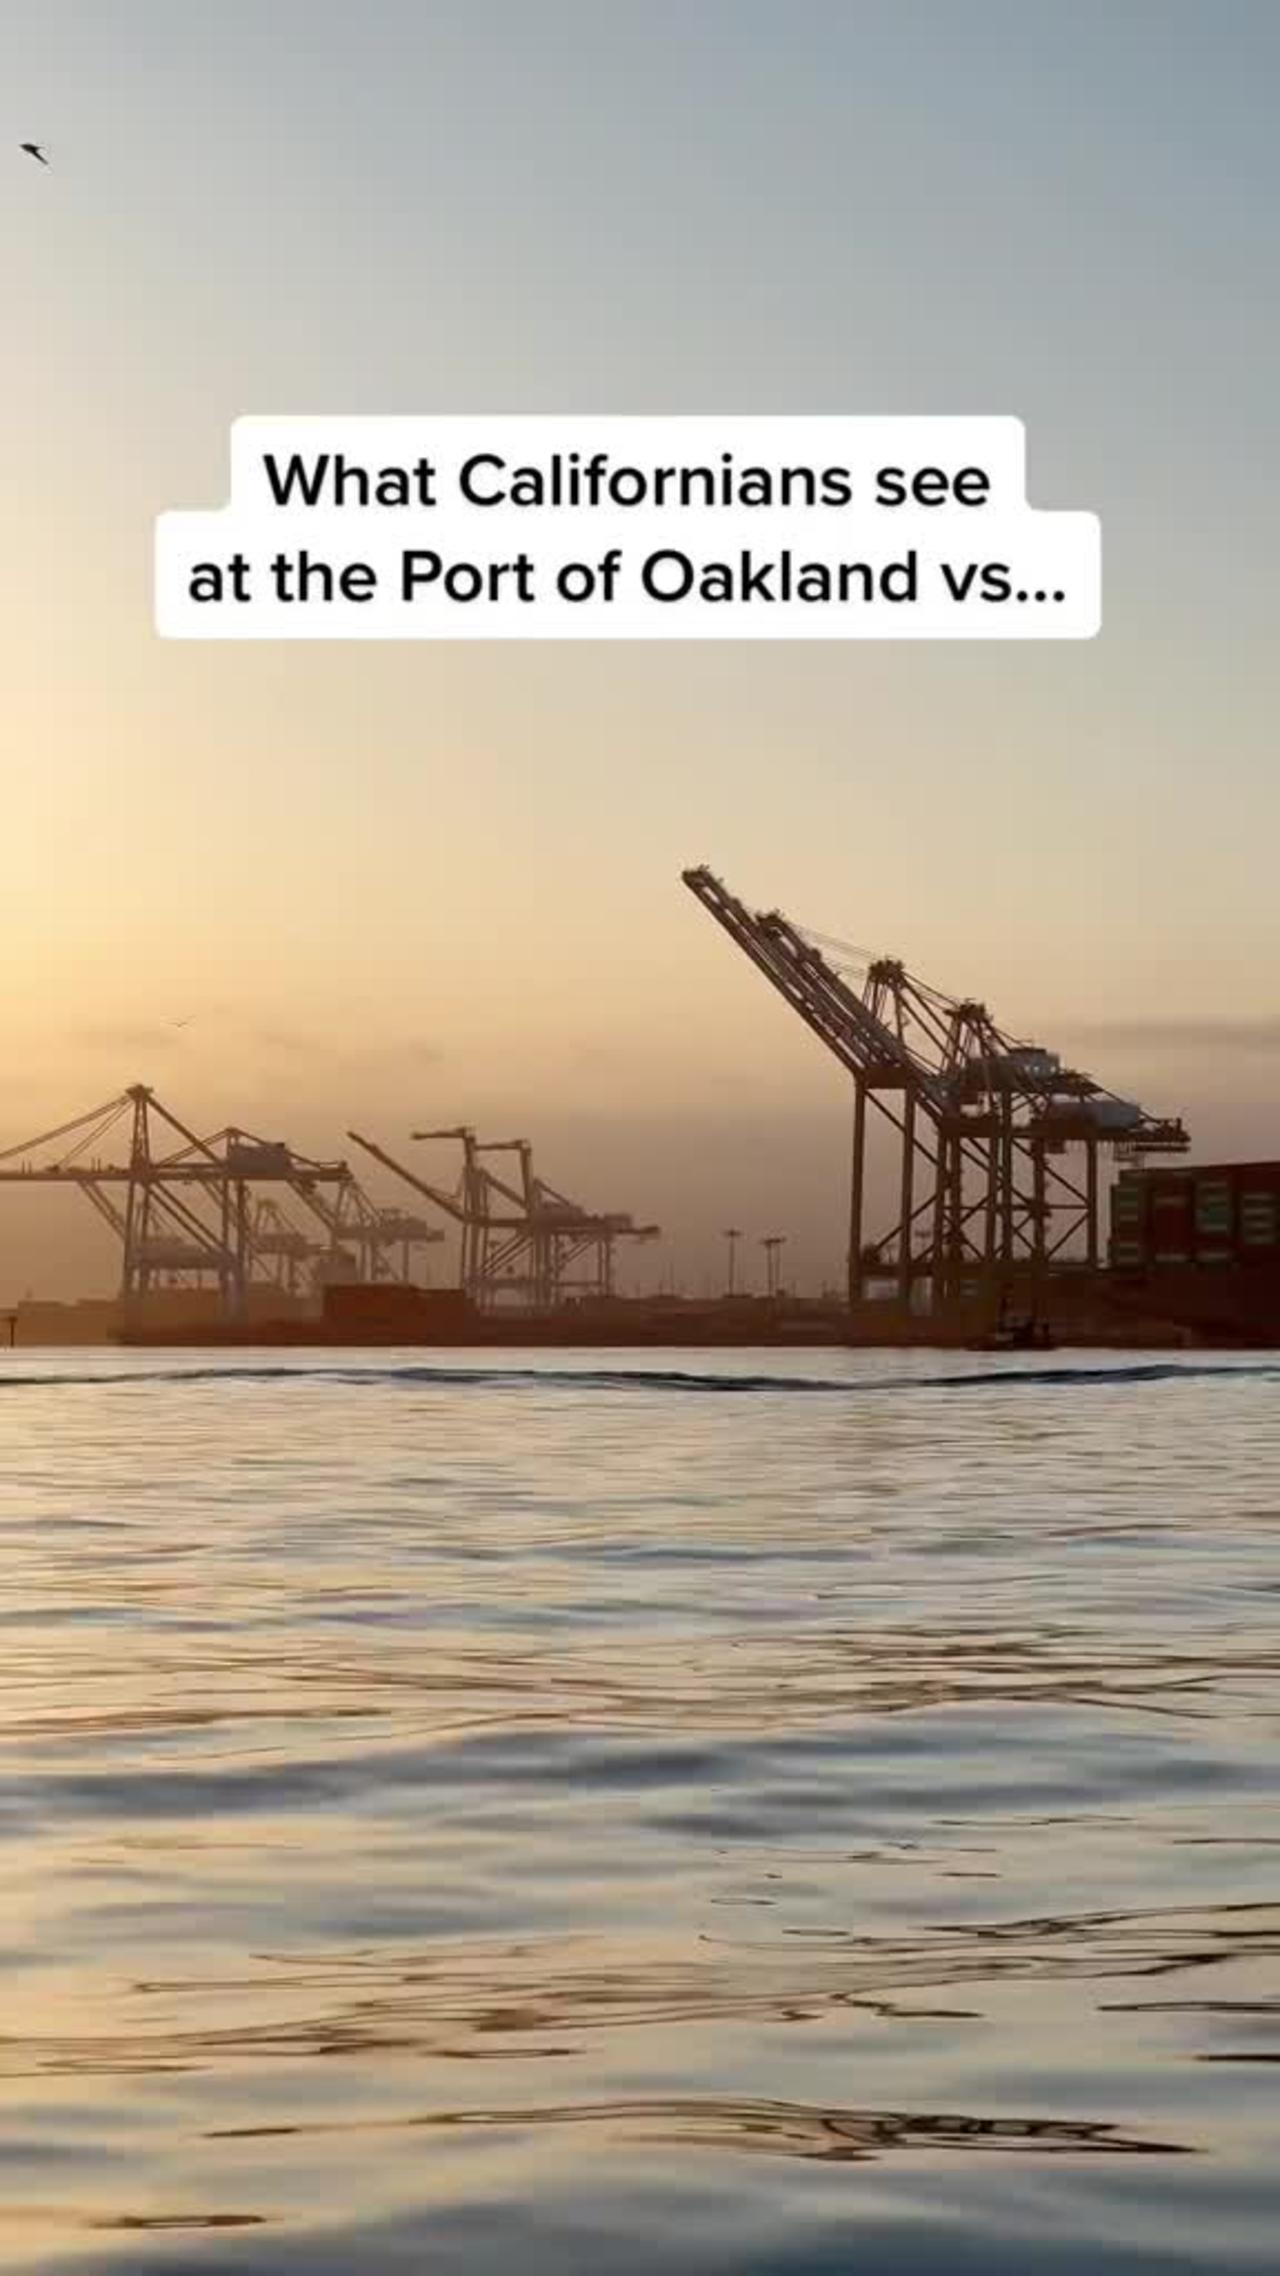 What Californians see at the Port of Oakland vs...